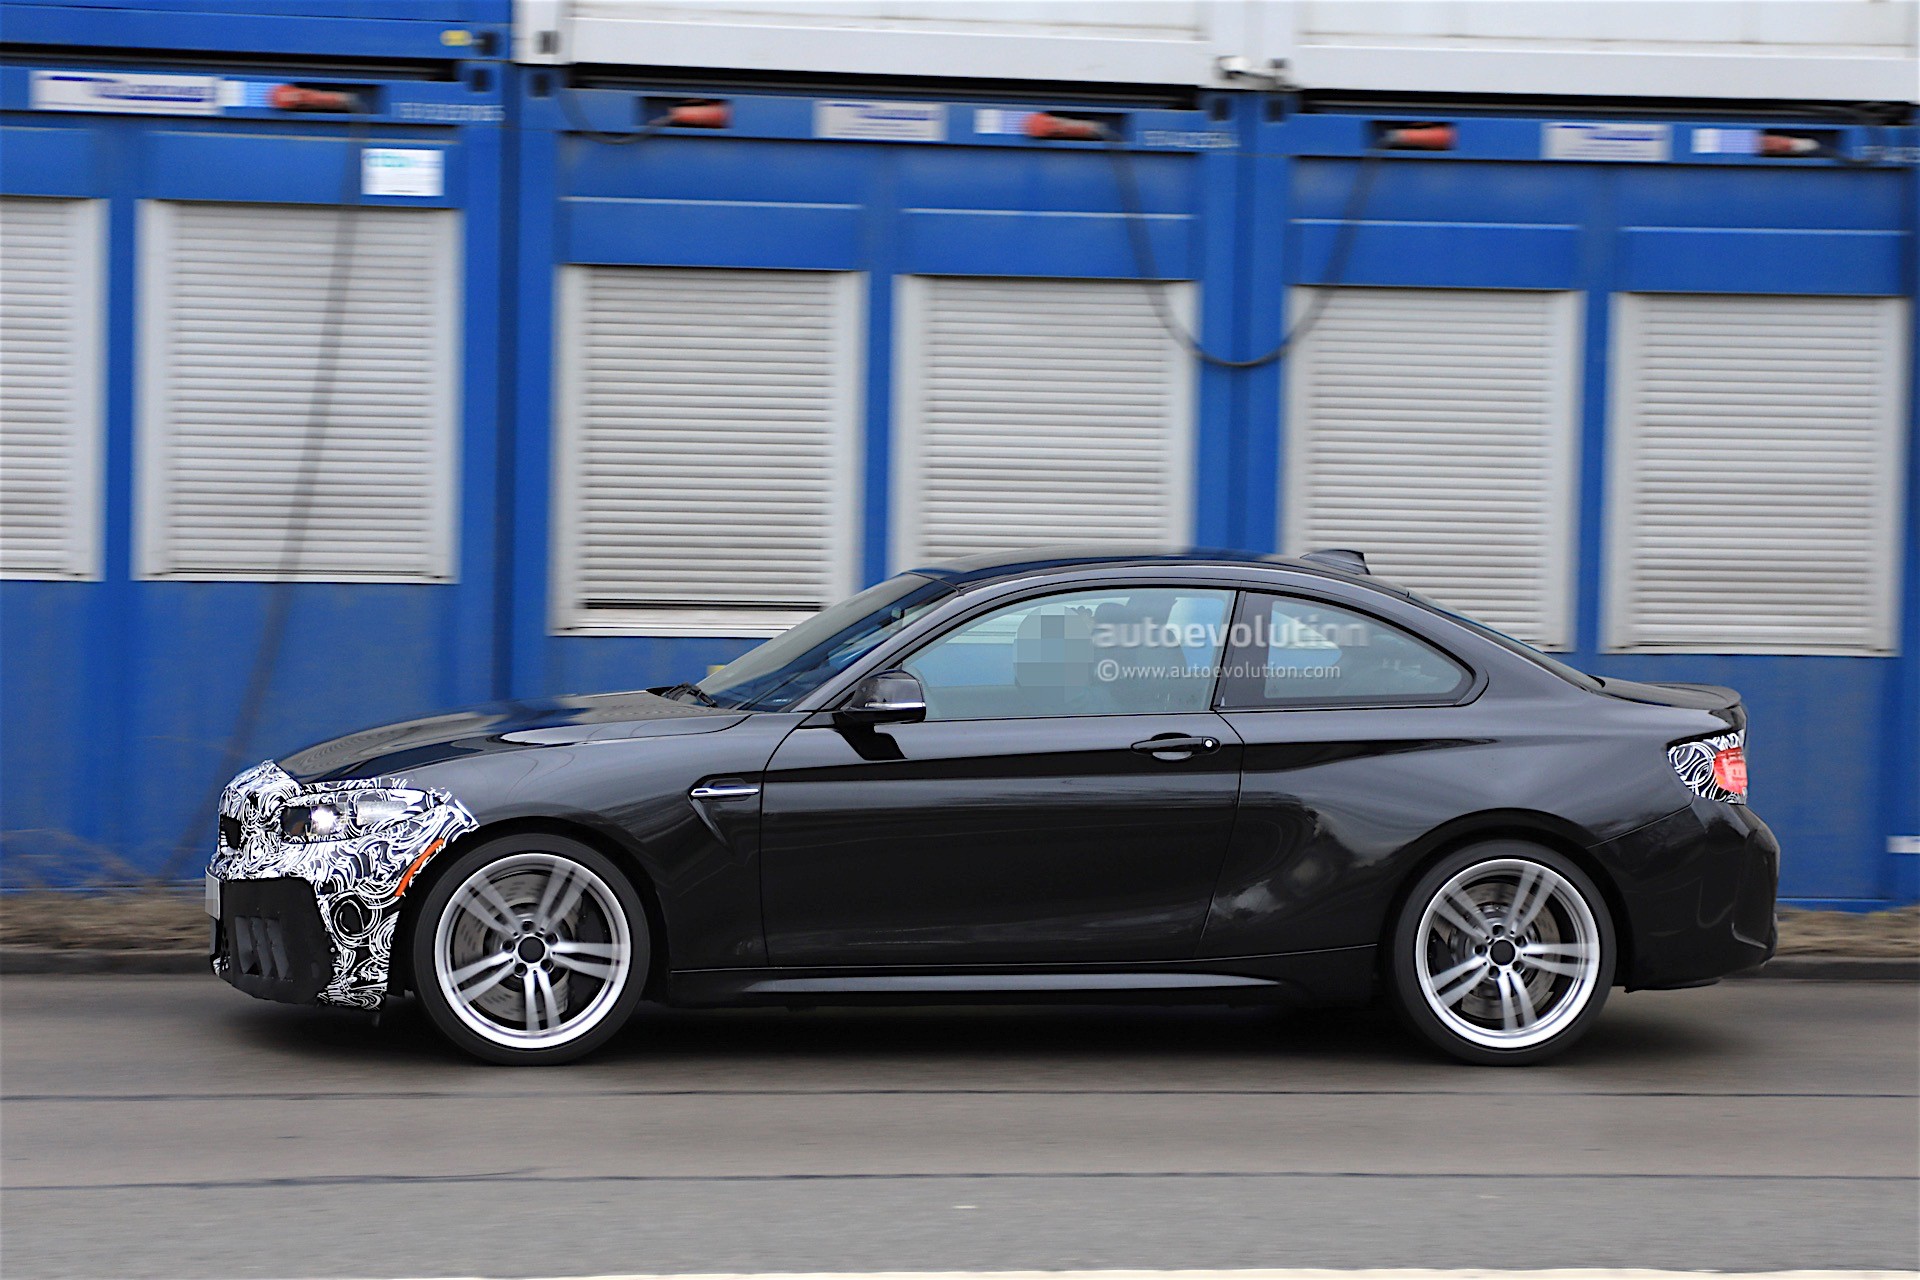 BMW M2 LCI: Last M Car With a Manual Transmission Before Switch to